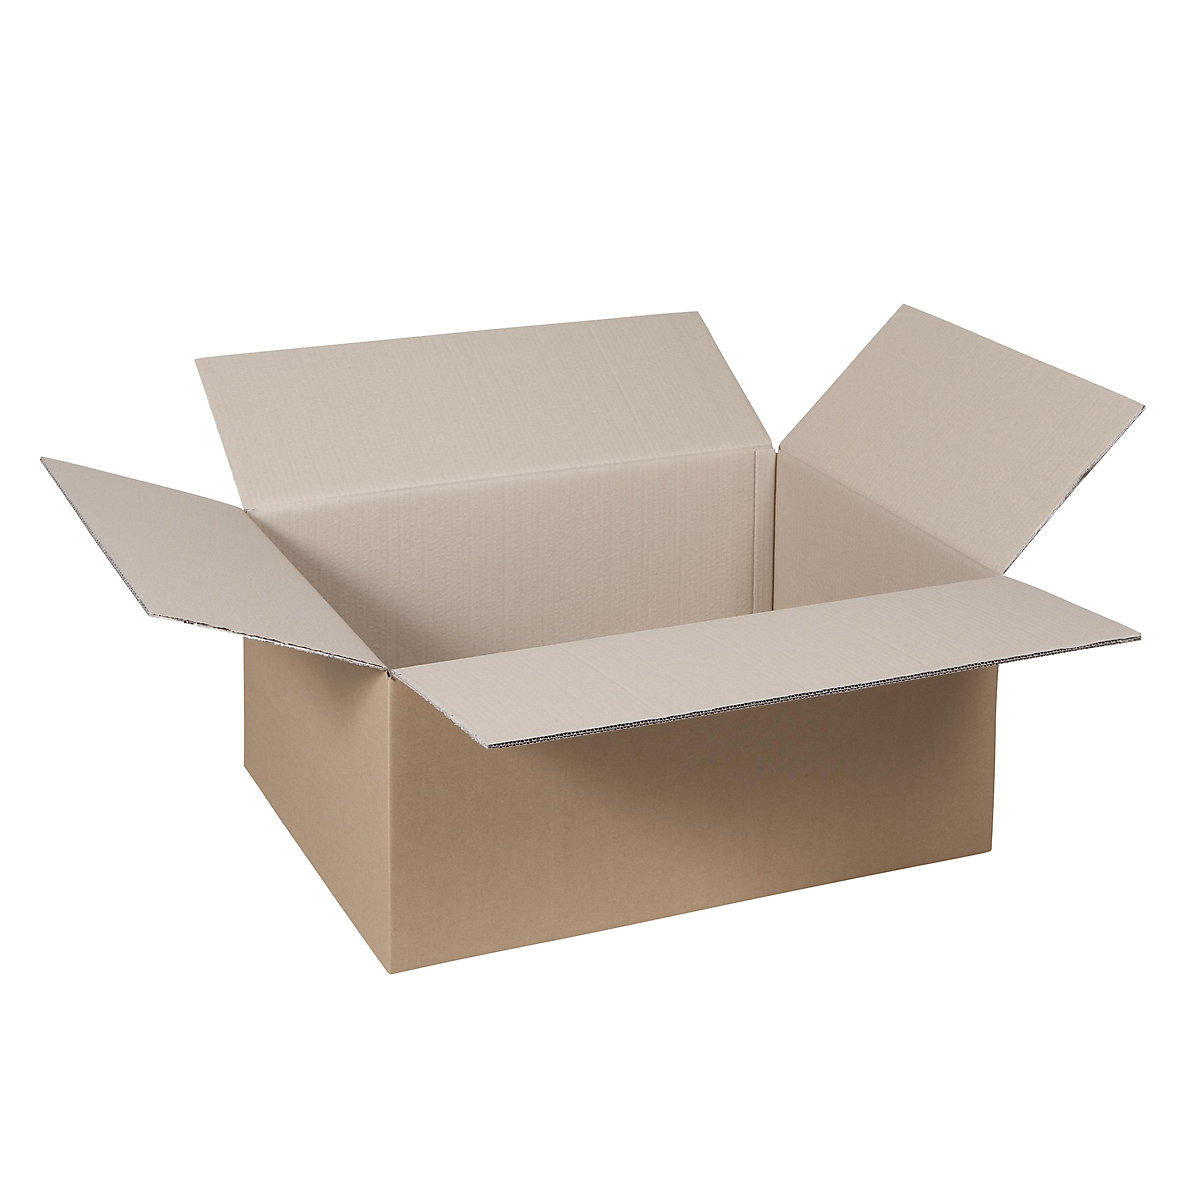 Folding cardboard box, FEFCO 0201, made of double fluted cardboard, internal dimensions 315 x 220 x 90 mm, pack of 100-52